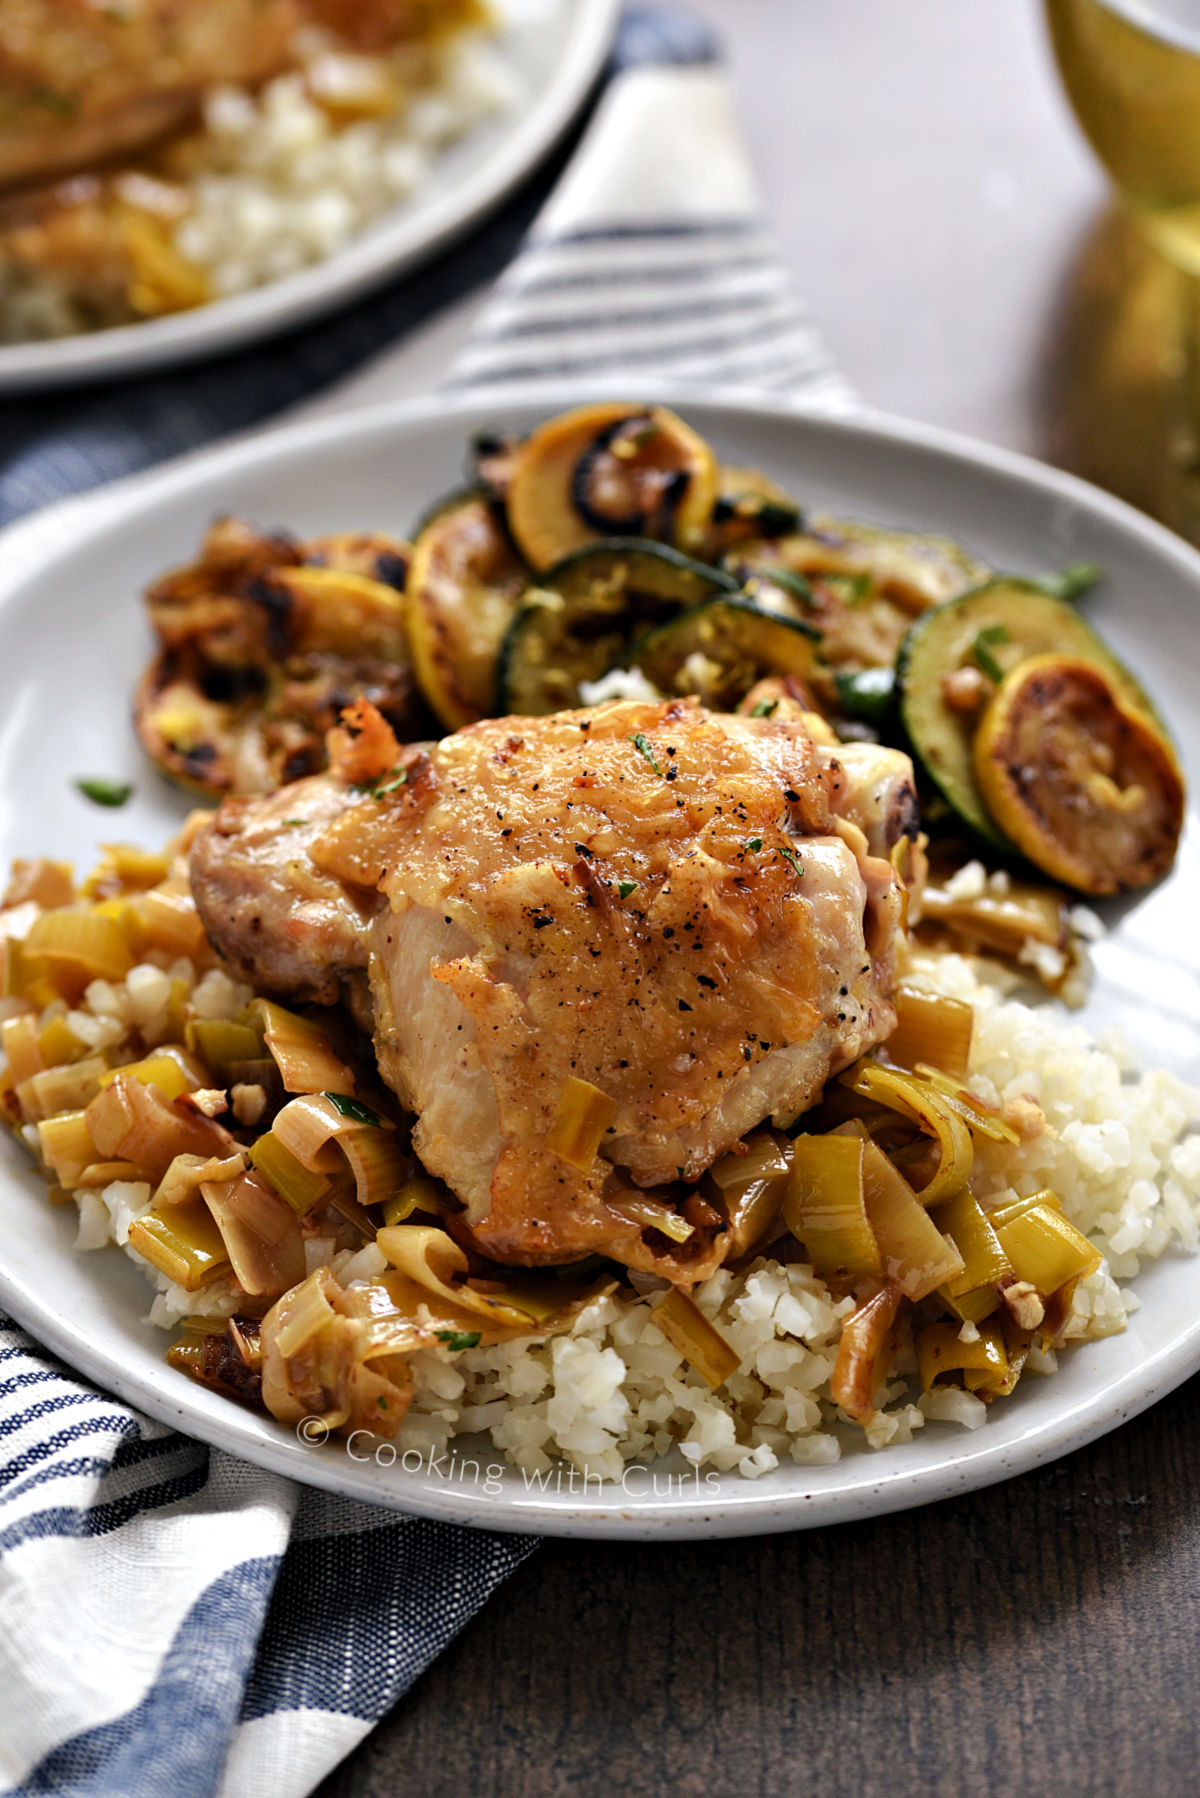 A chicken thigh on a bed of rice and leeks with sautéed zucchini and squash on the side. 